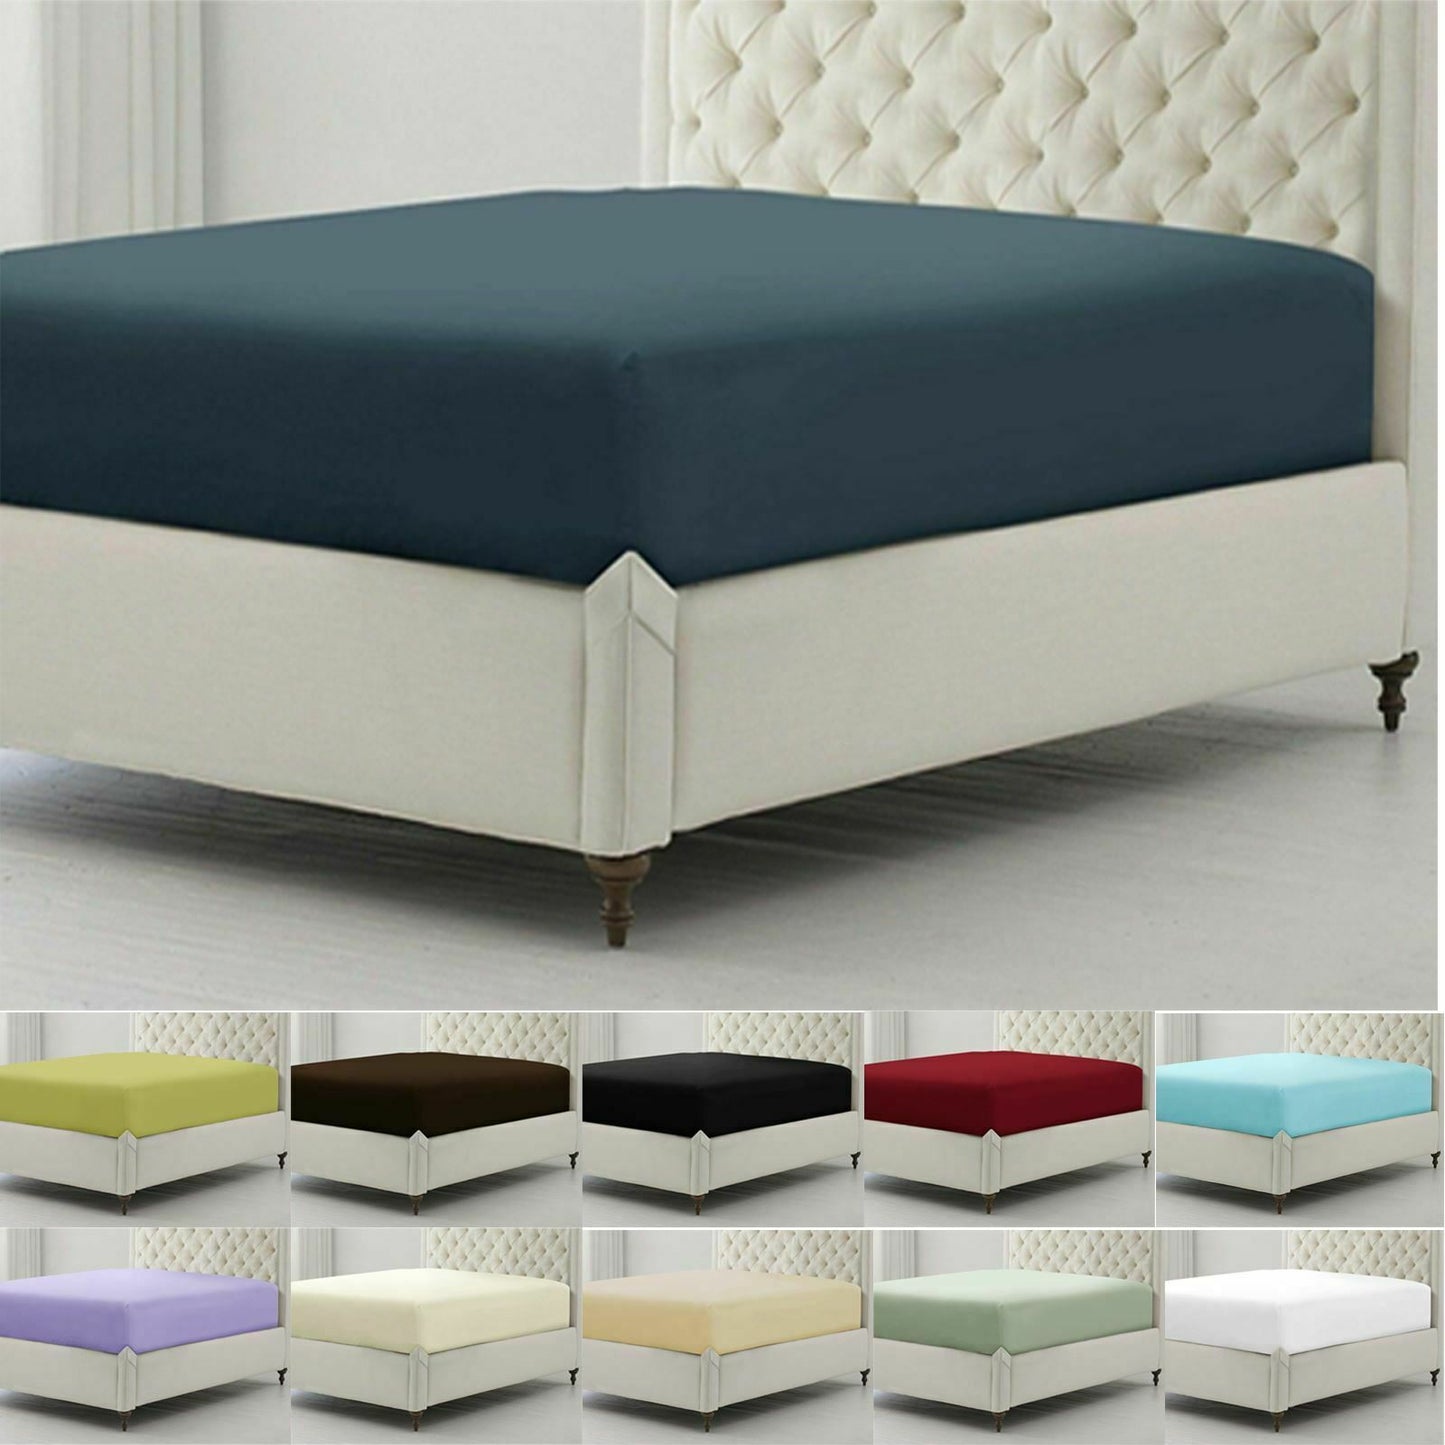 Egyptian Cotton Fitted Bed Sheet 16" Deep Or Pillowcase - TheComfortshop.co.ukBed Sheets0721718960768thecomfortshopTheComfortshop.co.ukRed 16In T200 Fitted Single NZRedFitted Sheet Single OnlyEgyptian Cotton Fitted Bed Sheet 16" Deep Or Pillowcase - TheComfortshop.co.uk